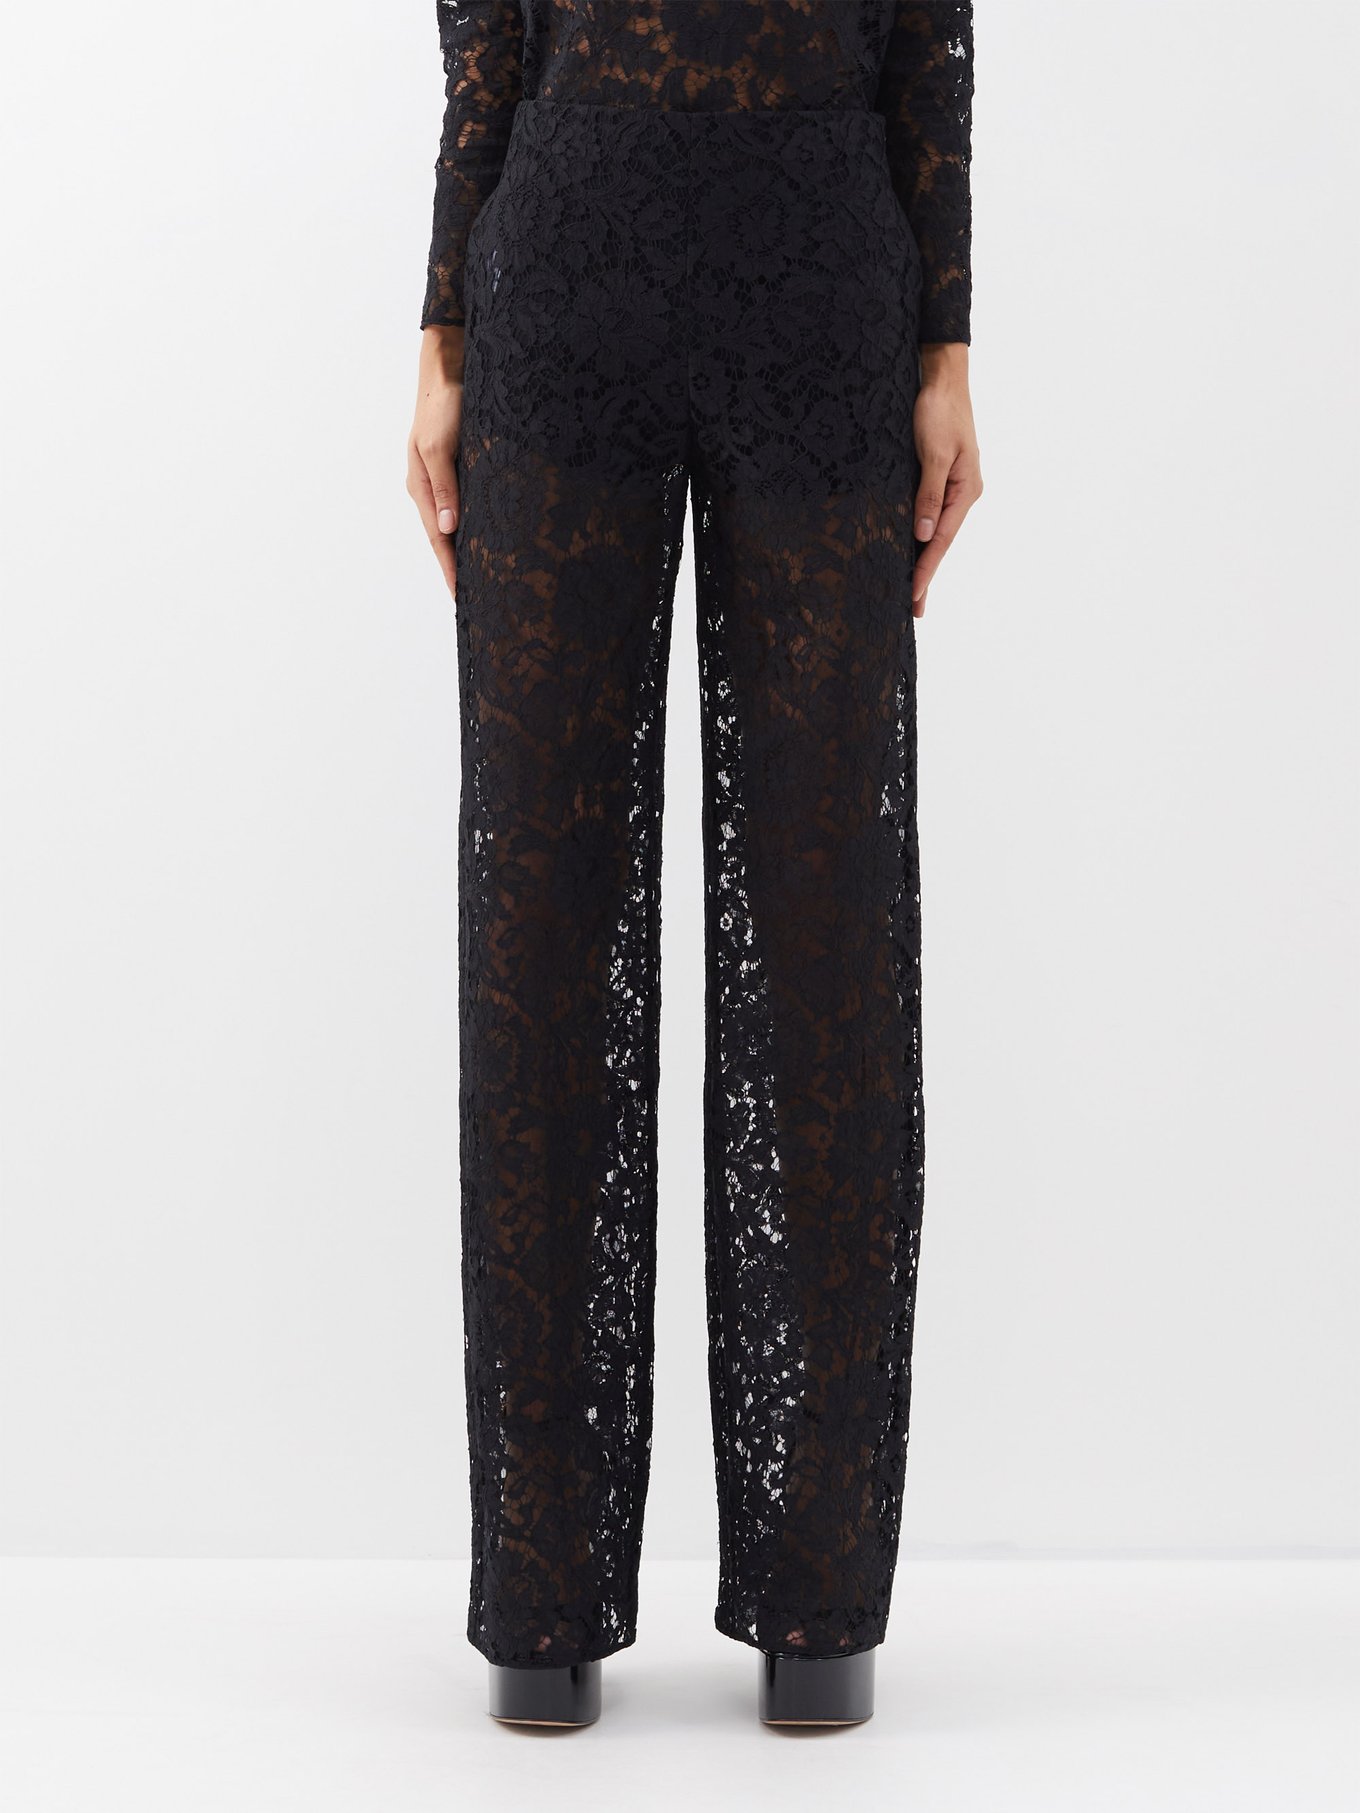 Floral lace trouser in Black Ready-to-wear